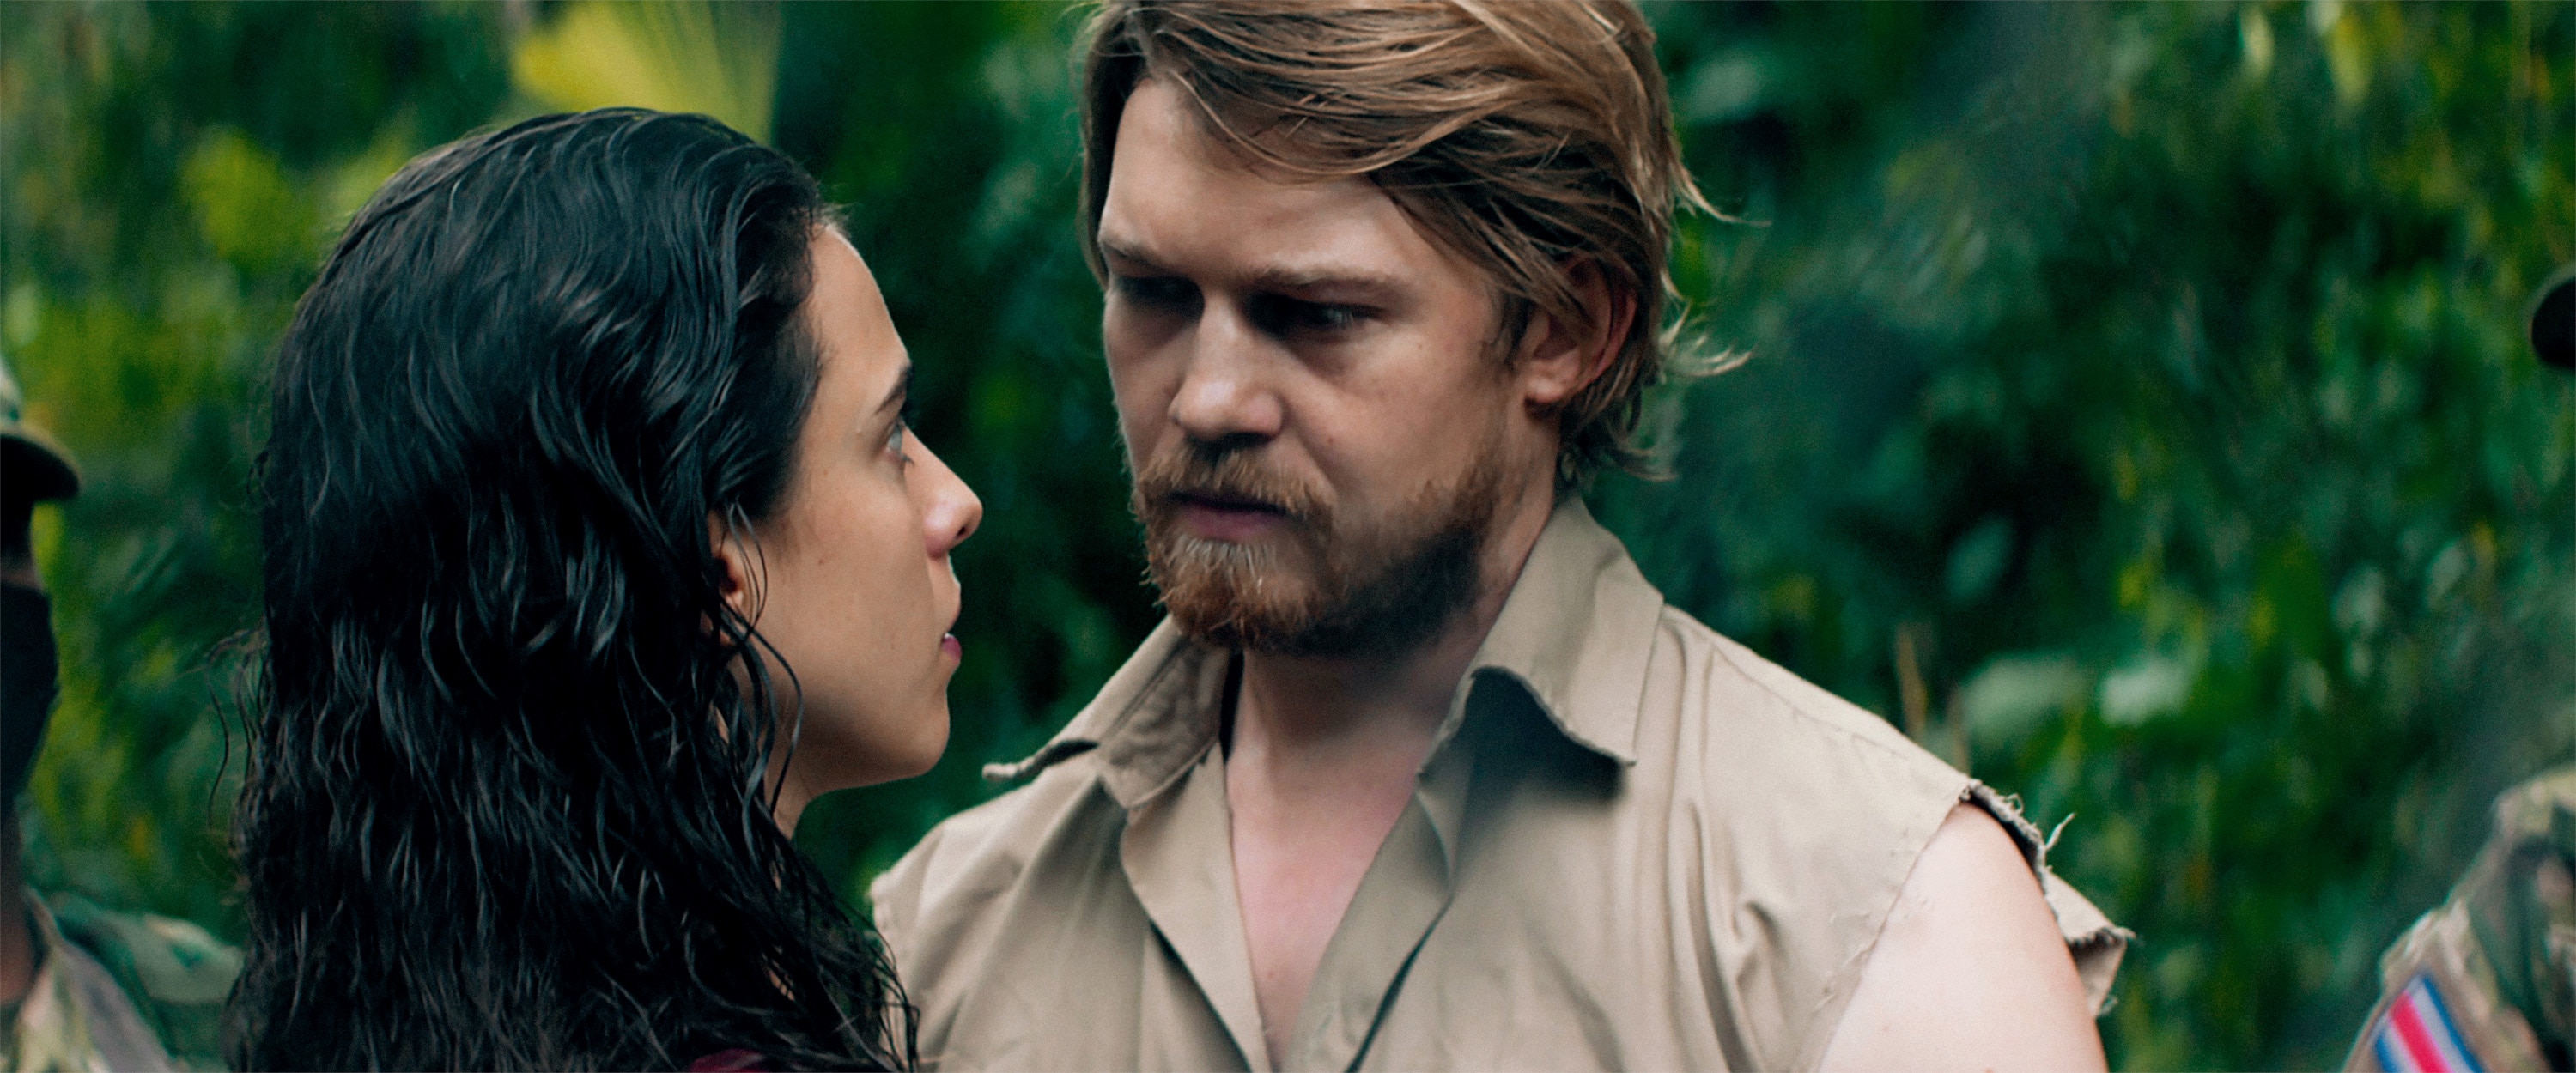 Stars at Noon finds Joe Alwyn and Margaret Qualley in a steamy love affair in present-day Nicaragua